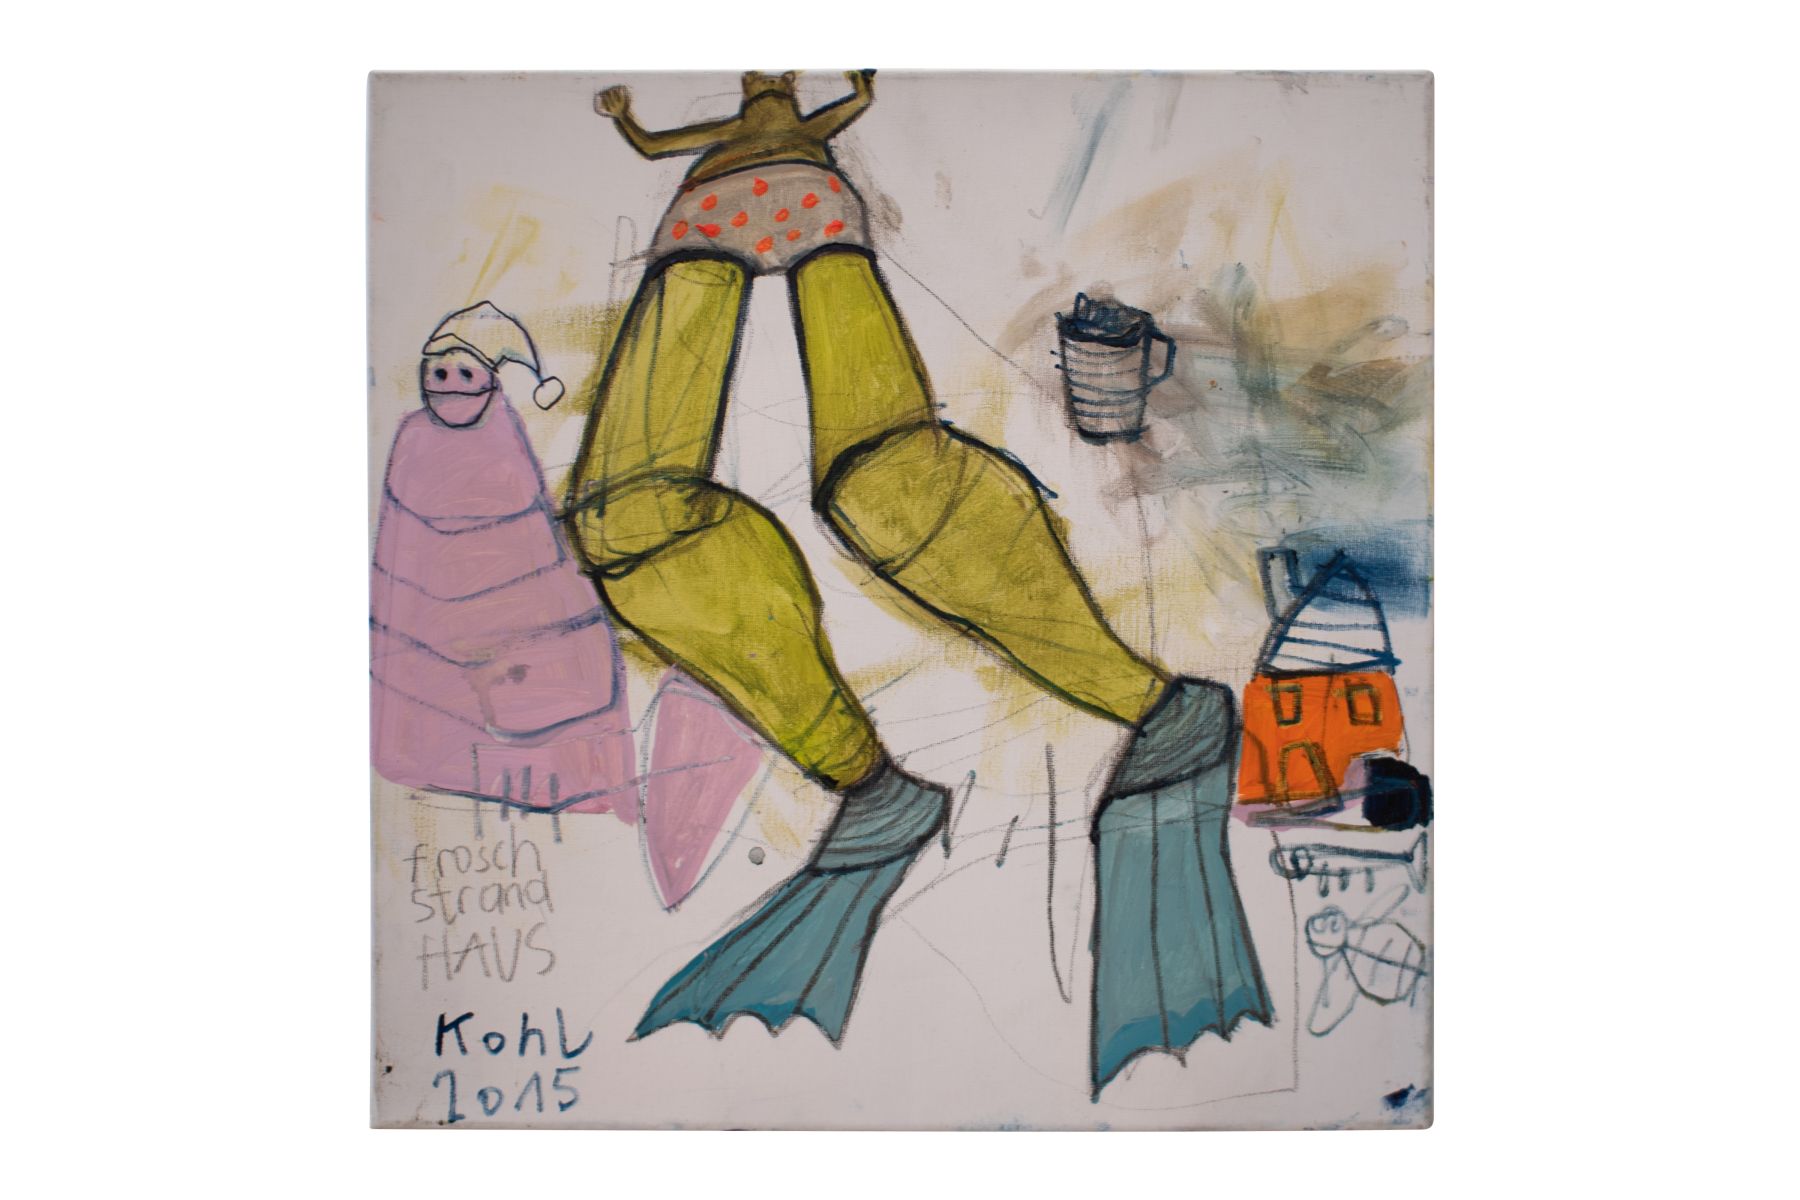 Peter Kohl(1971) " Frog beach house" 2015 - Image 7 of 9